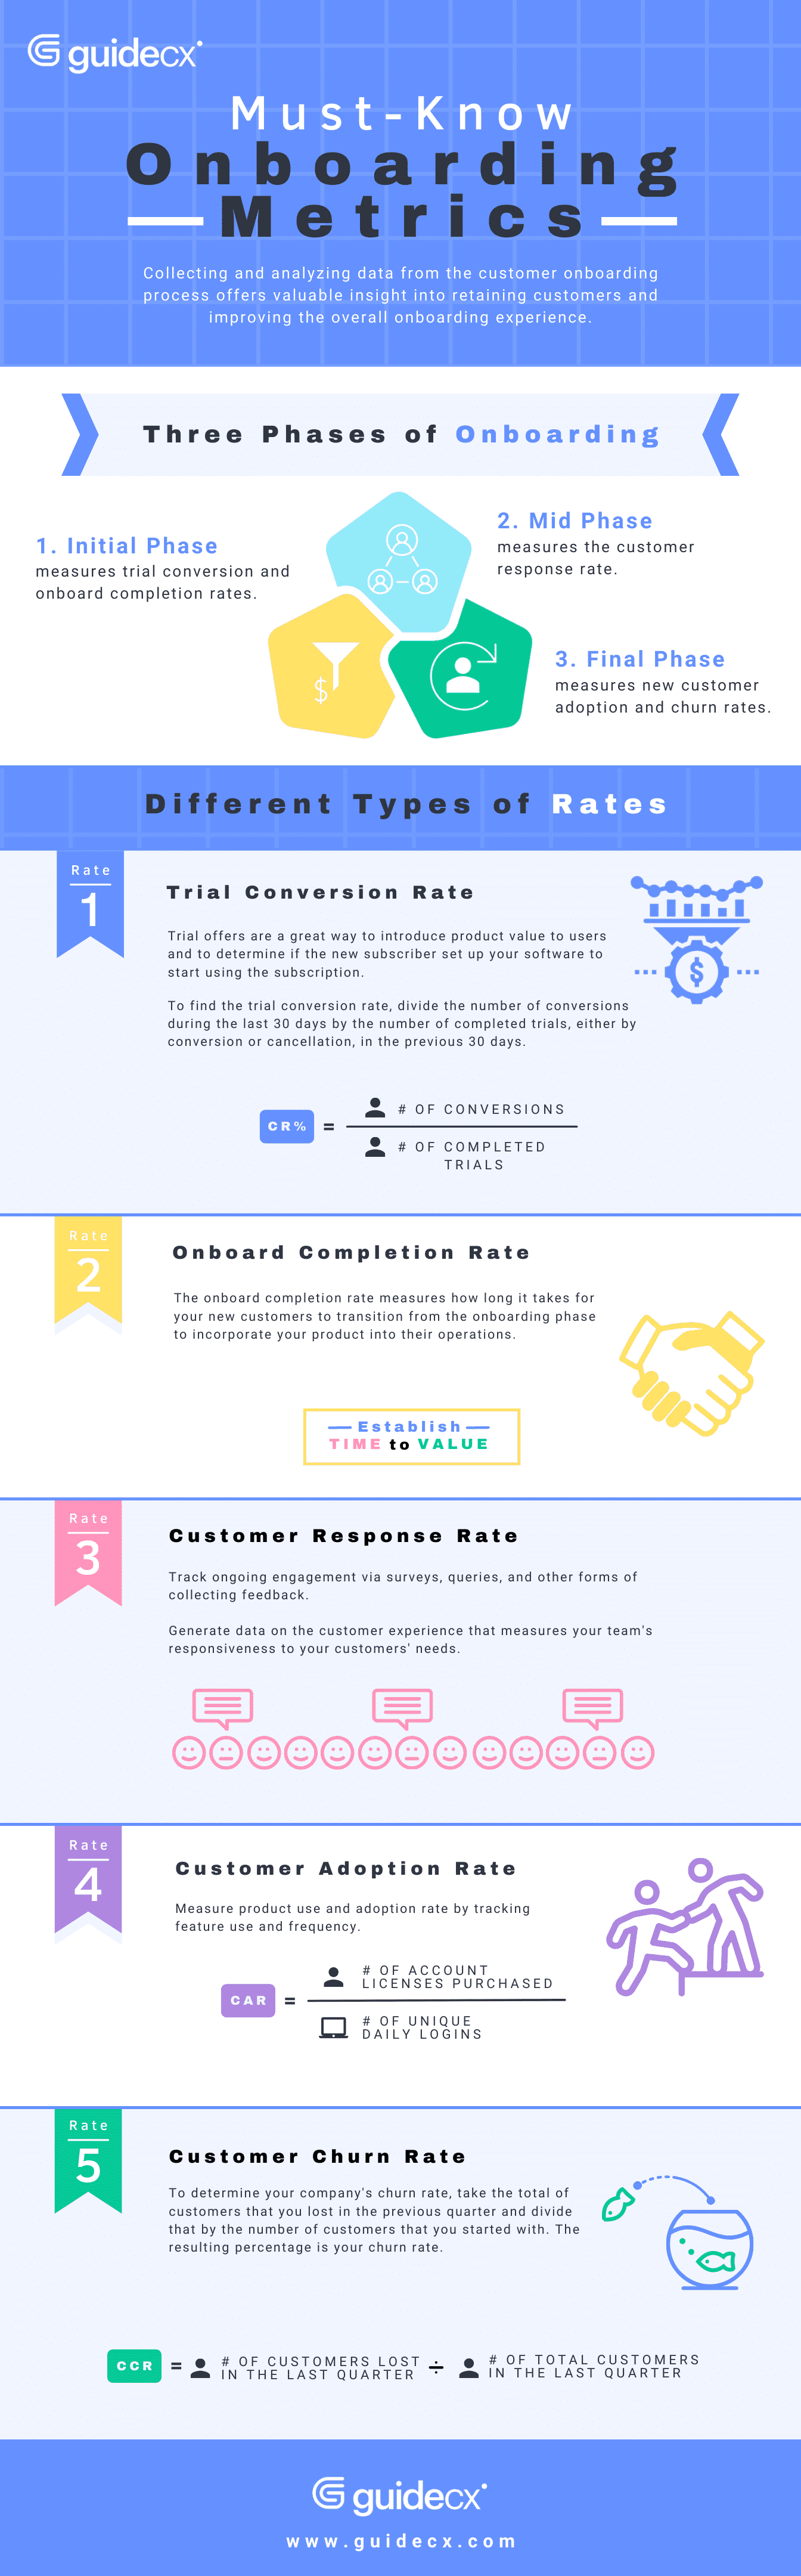 must-know onboarding metrics for client onboarding strategies infographic 2021